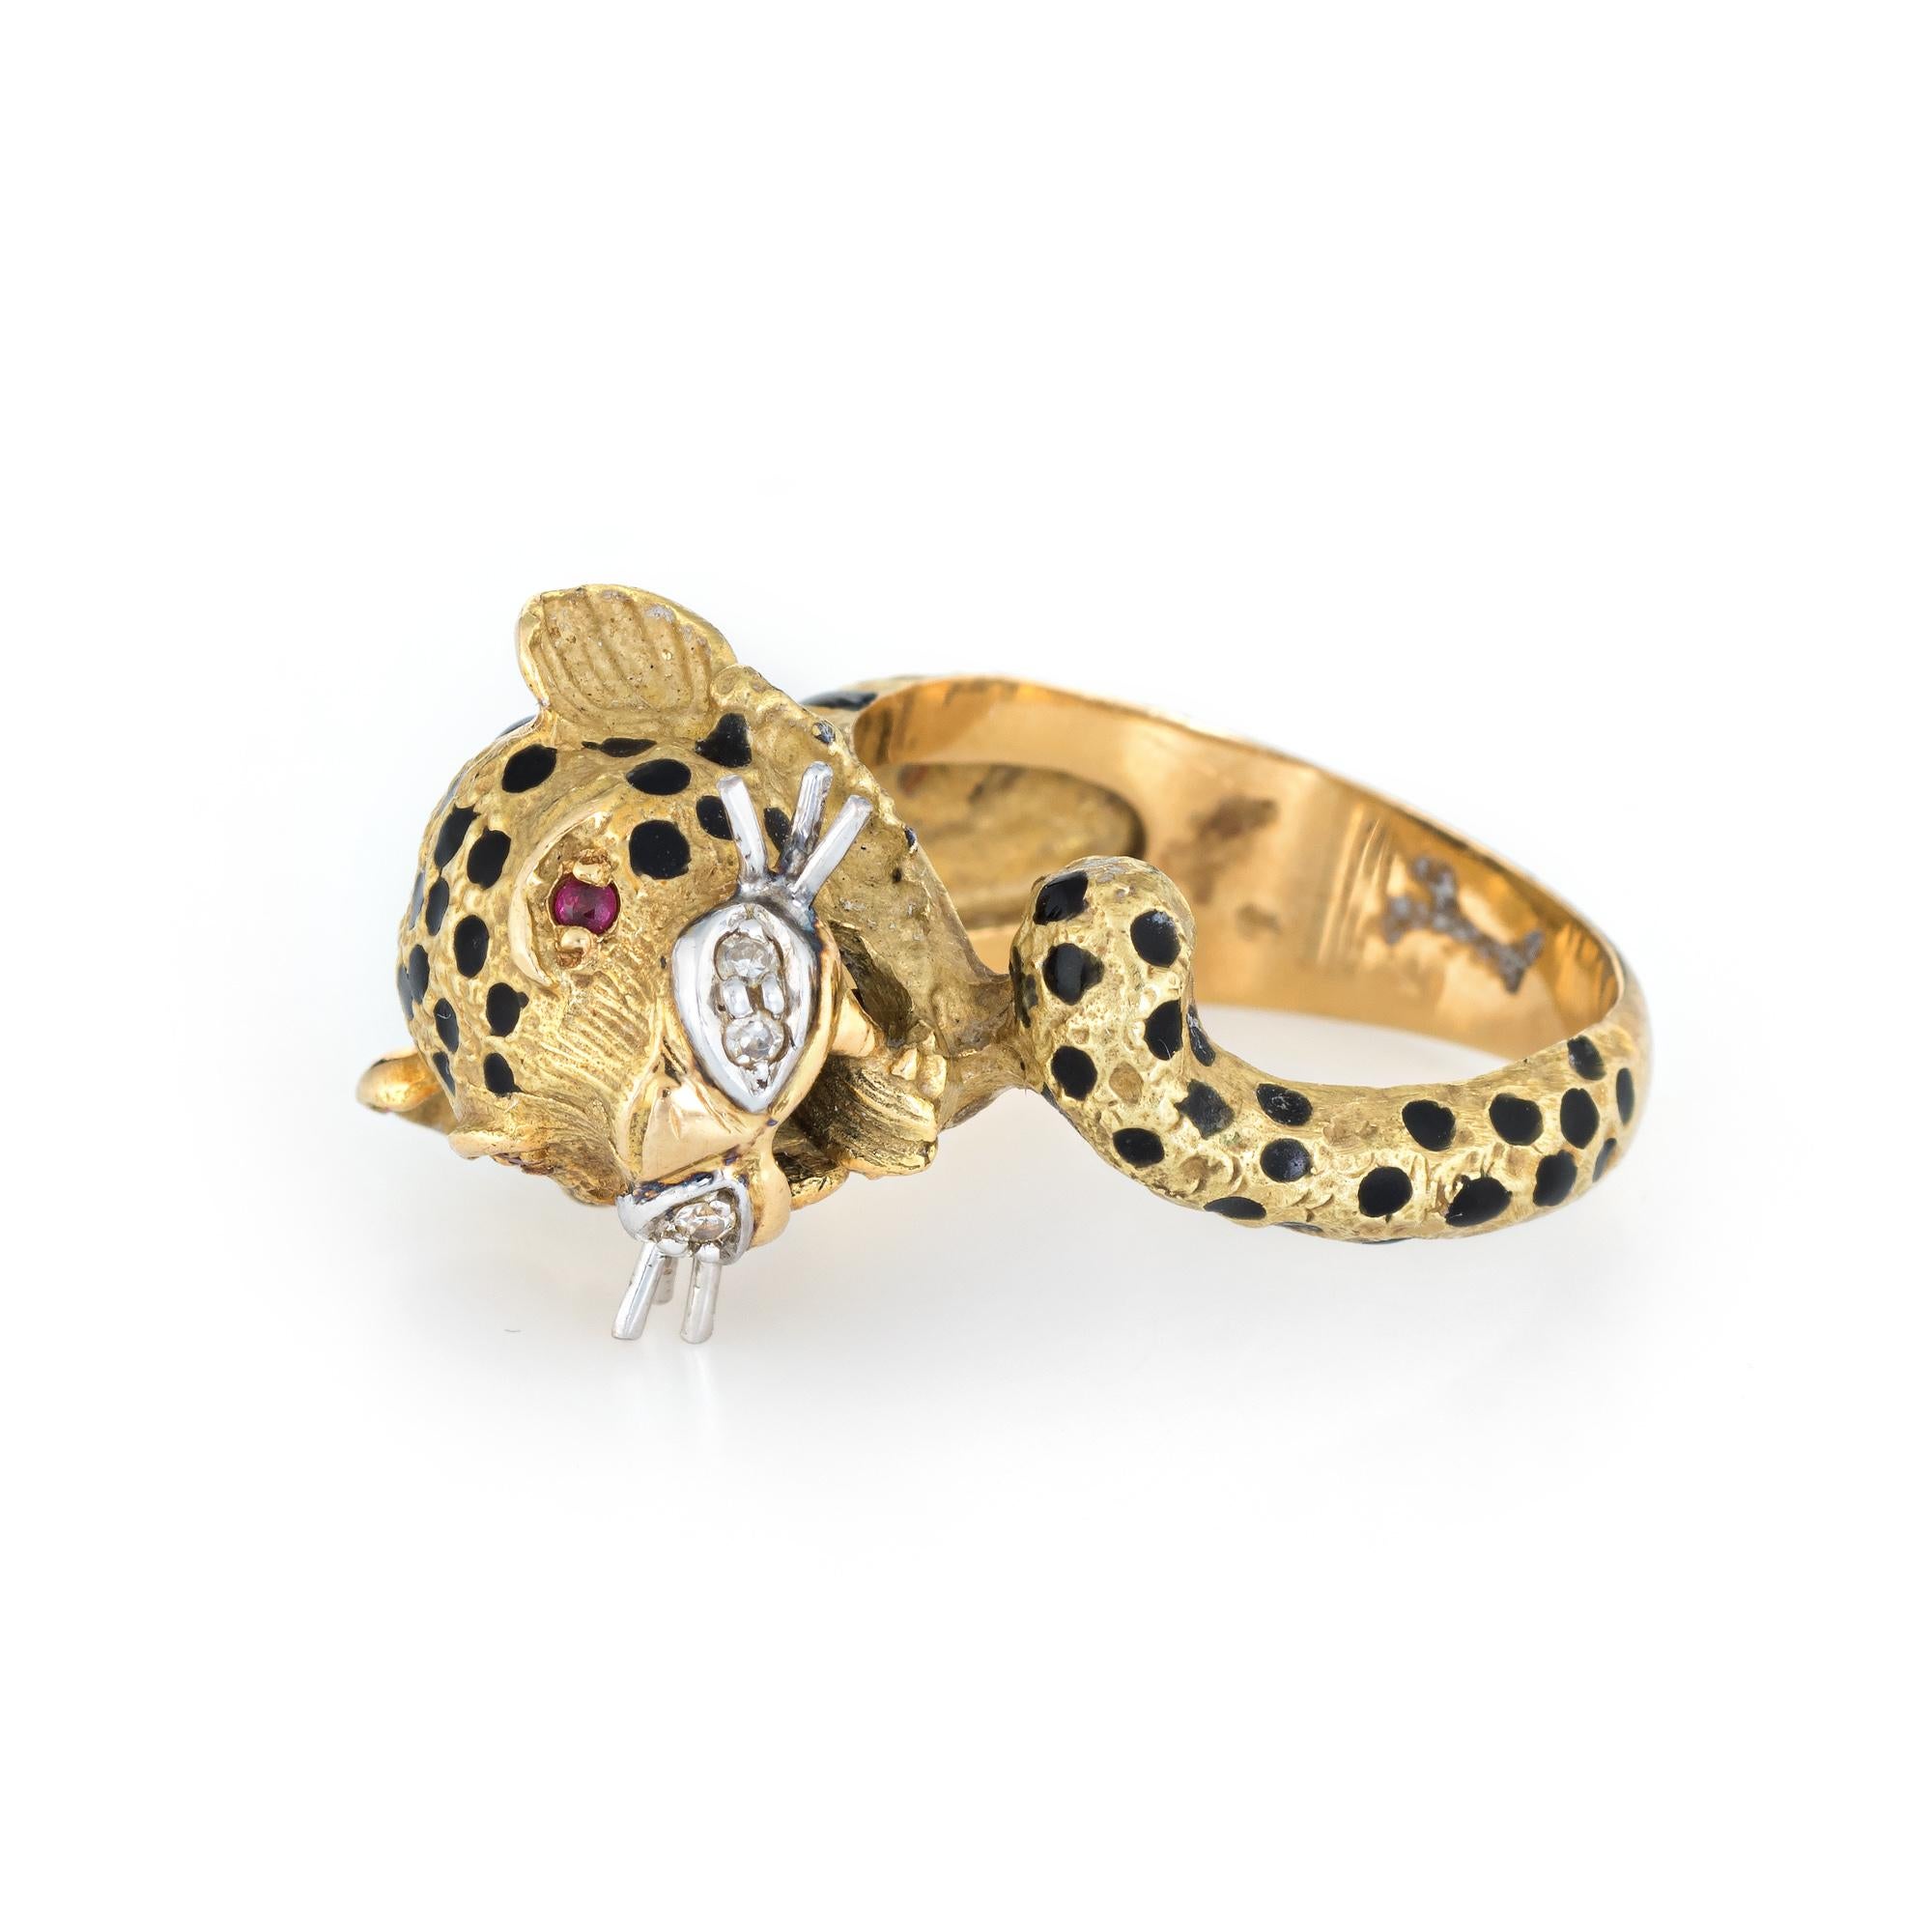 Finely detailed vintage leopard ring (circa 1960s to 1970s) crafted in 18 karat yellow gold. 

Diamonds total an estimated 0.02 carats (estimated at H-I color and SI2 clarity), accented with an estimated 0.02 carats of rubies.  

The leopard